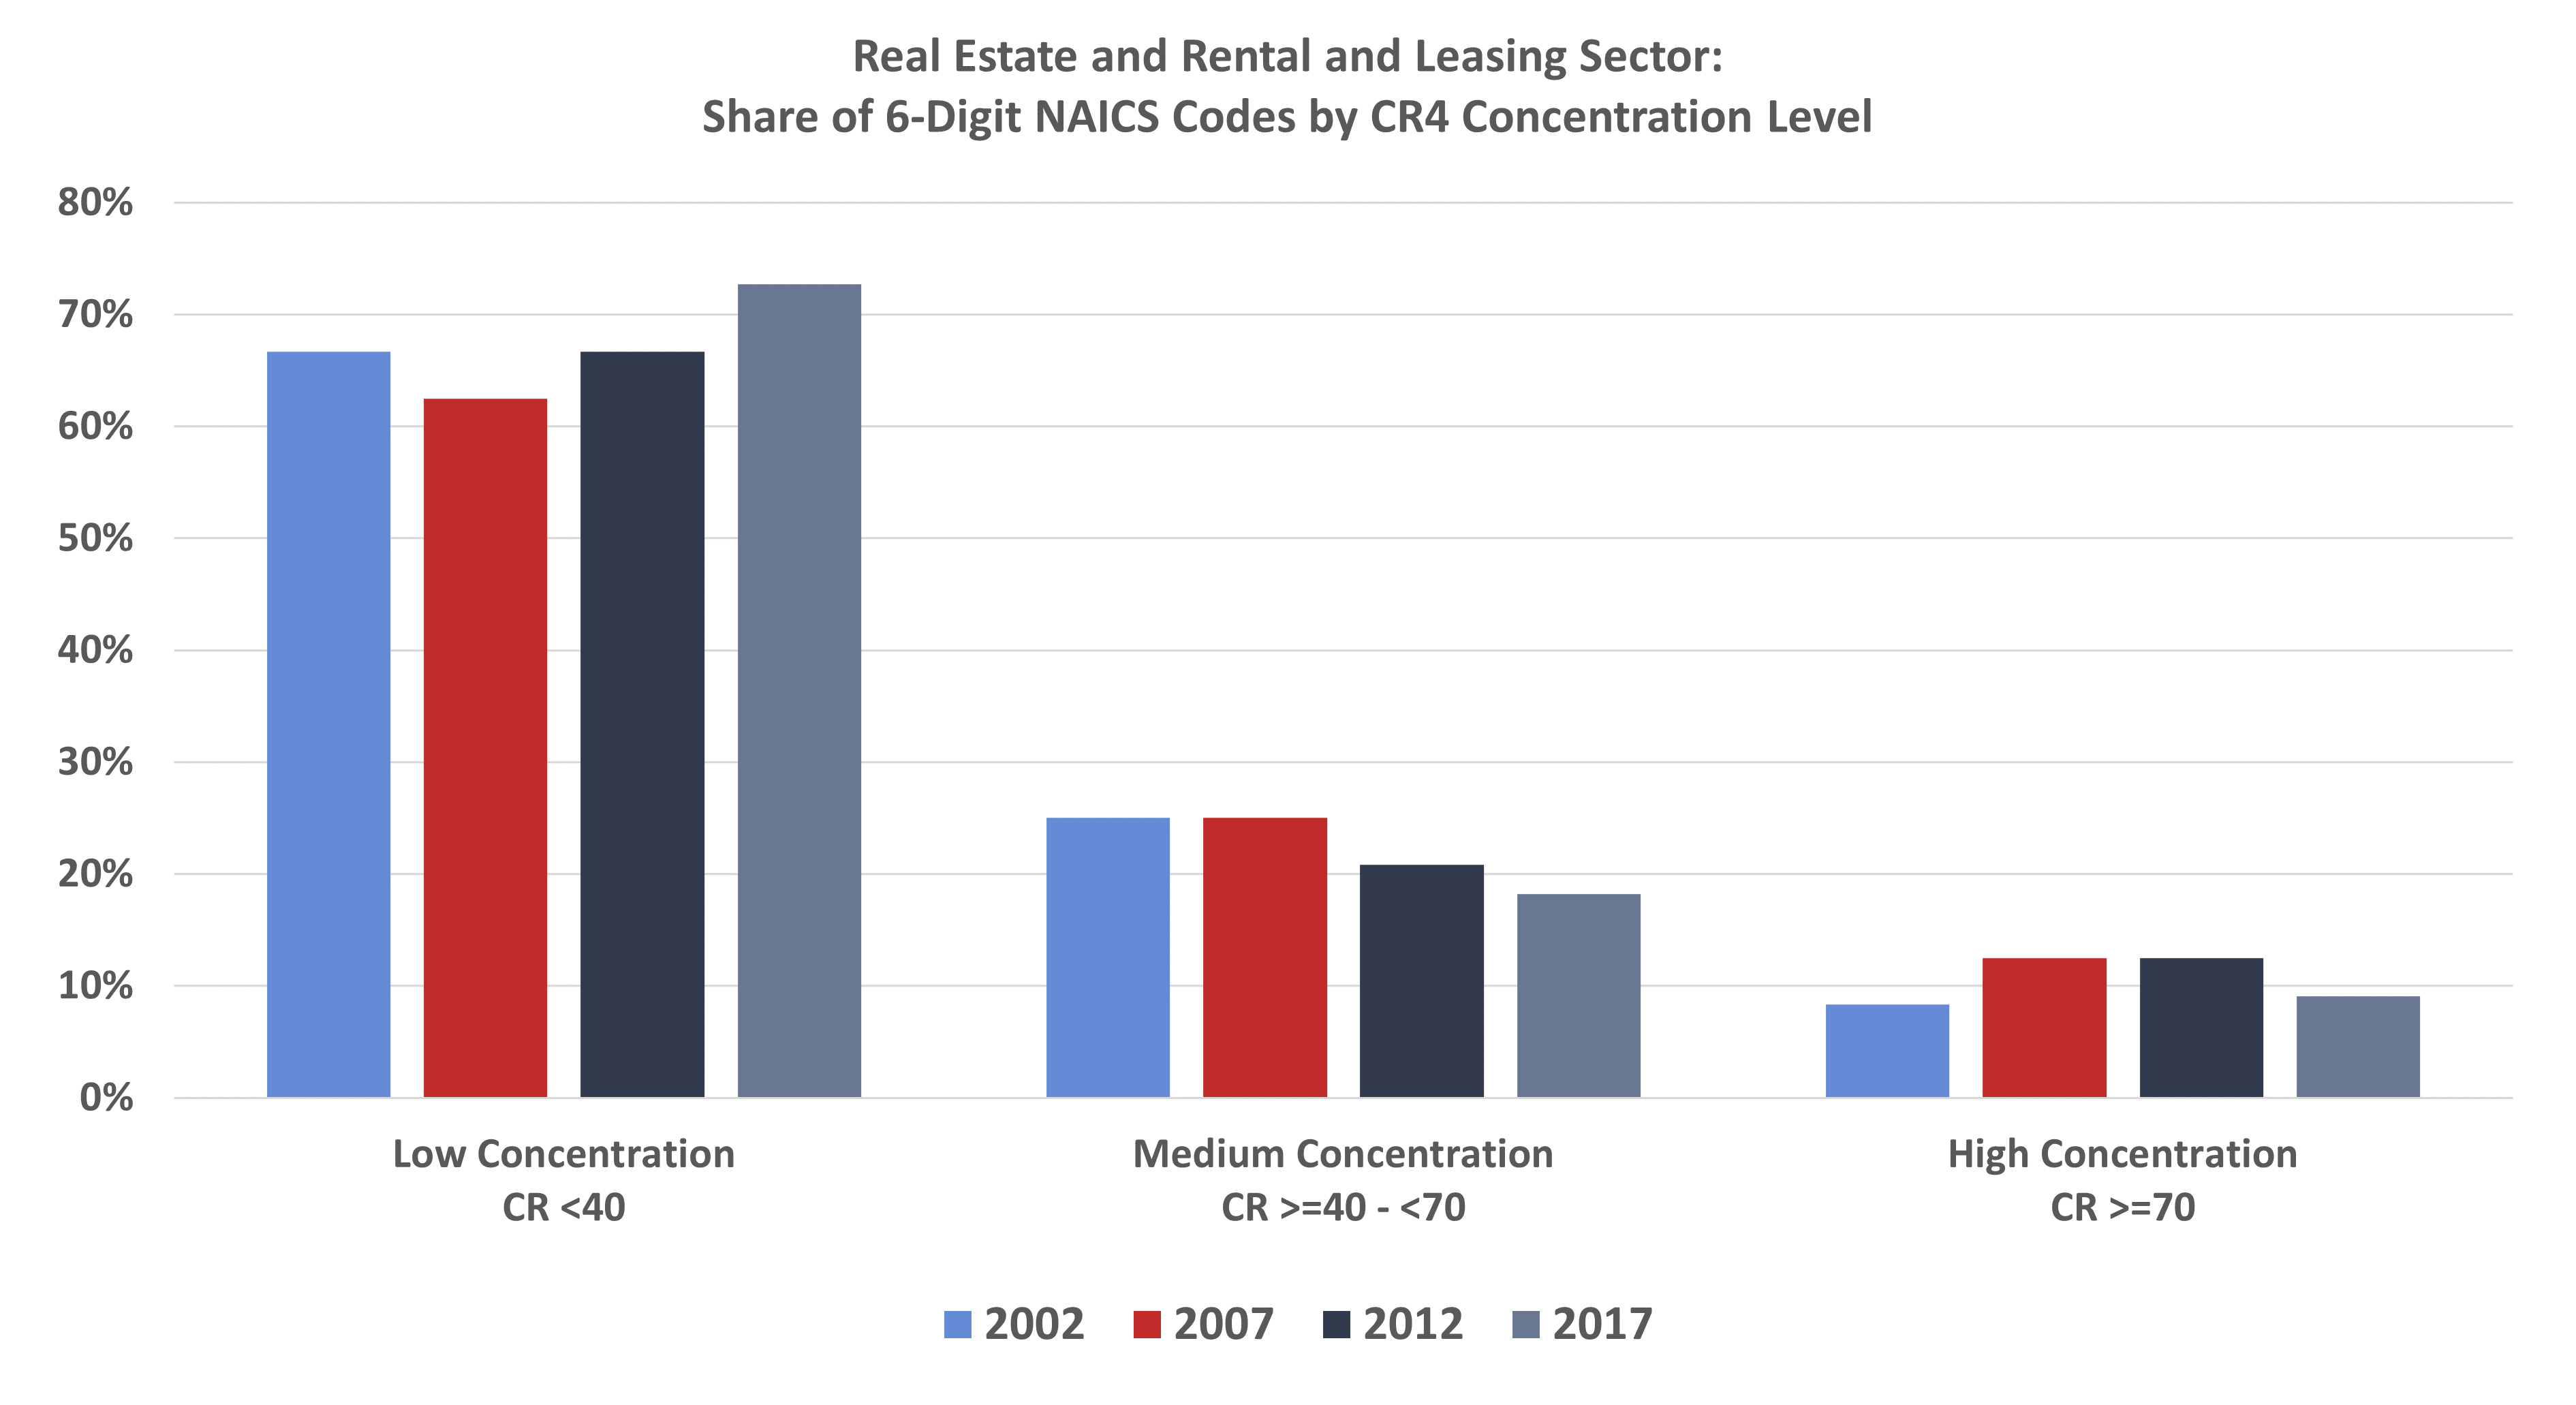 Real Estate and Rental and Leasing Sector: Share of 6-Digit NAICS Codes by CR4 Concentration Level